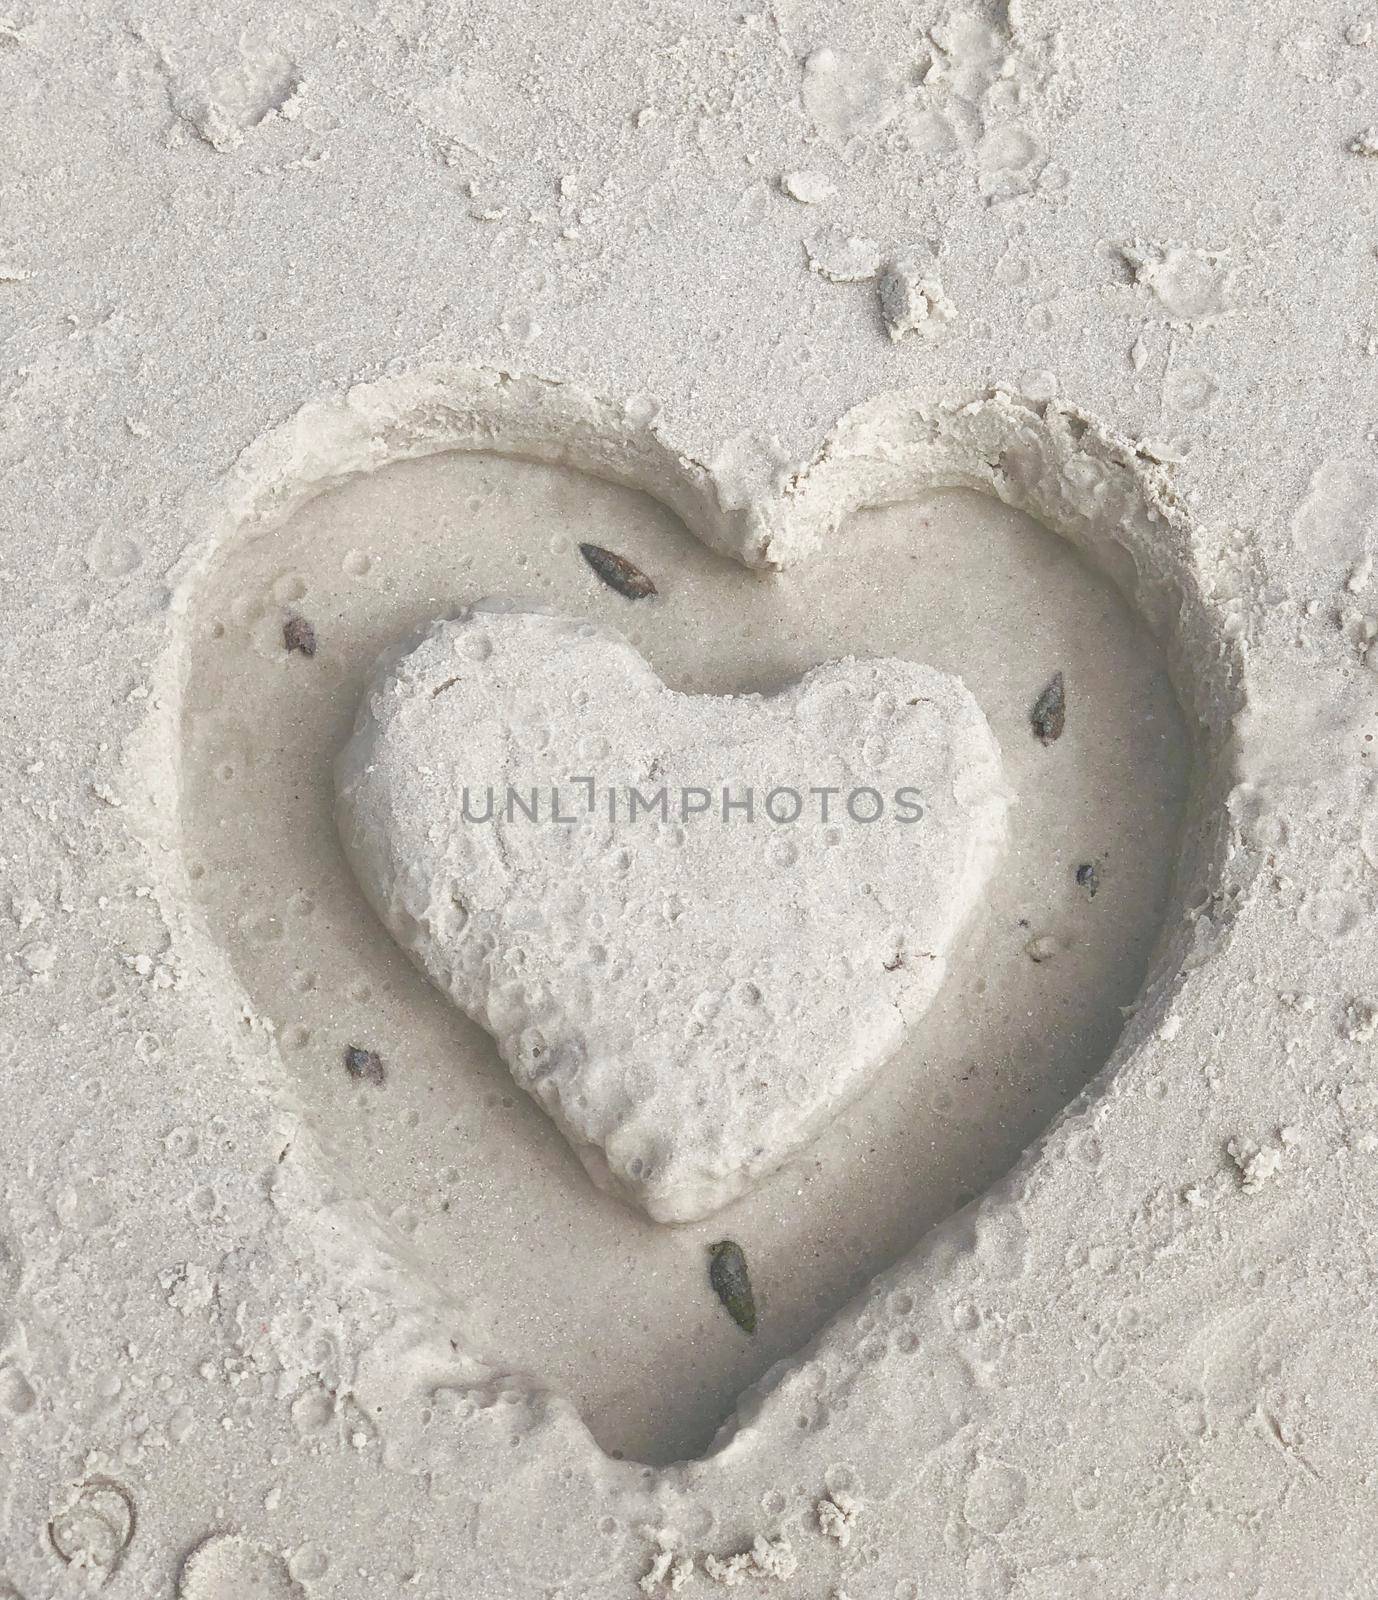 Top corner close-up of hand-drawn abstract heart on the beach, feeling, love concept.